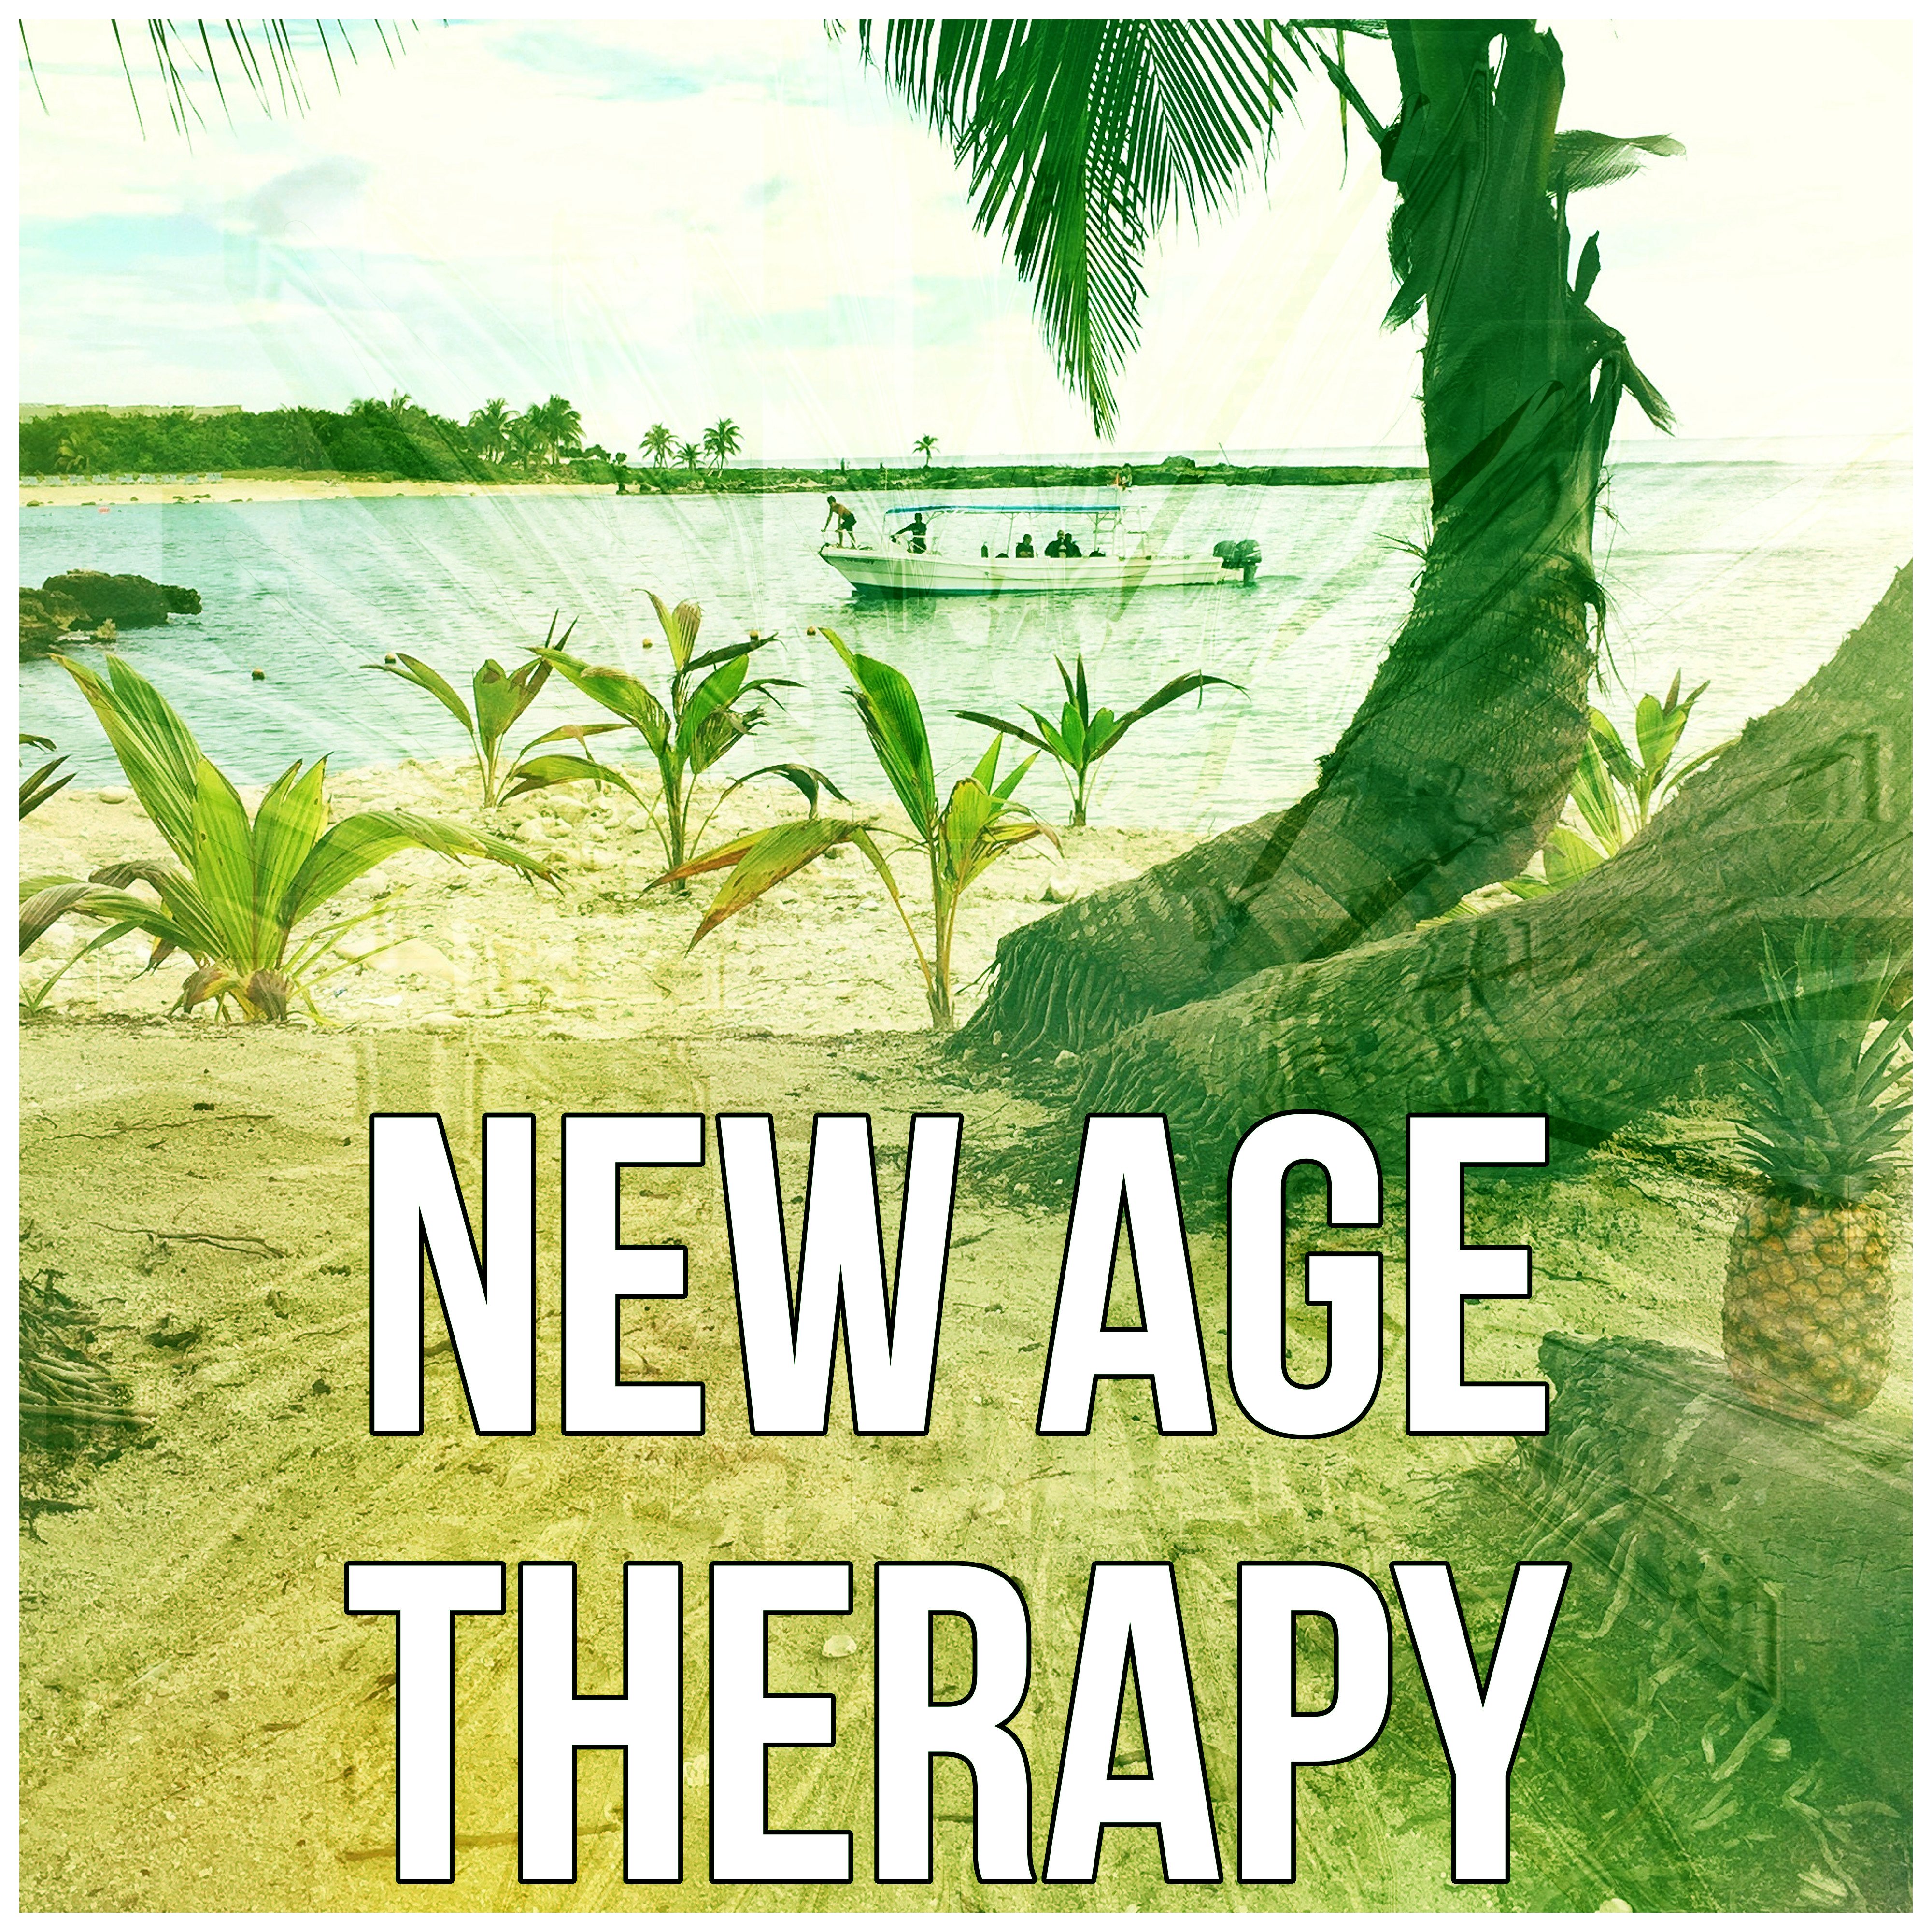 New Age Therapy - Music for Therapy, Serenity Spa, Healing Massage, Nature Sounds, Stress Relief, Relaxation, Ambient Music, Meditation